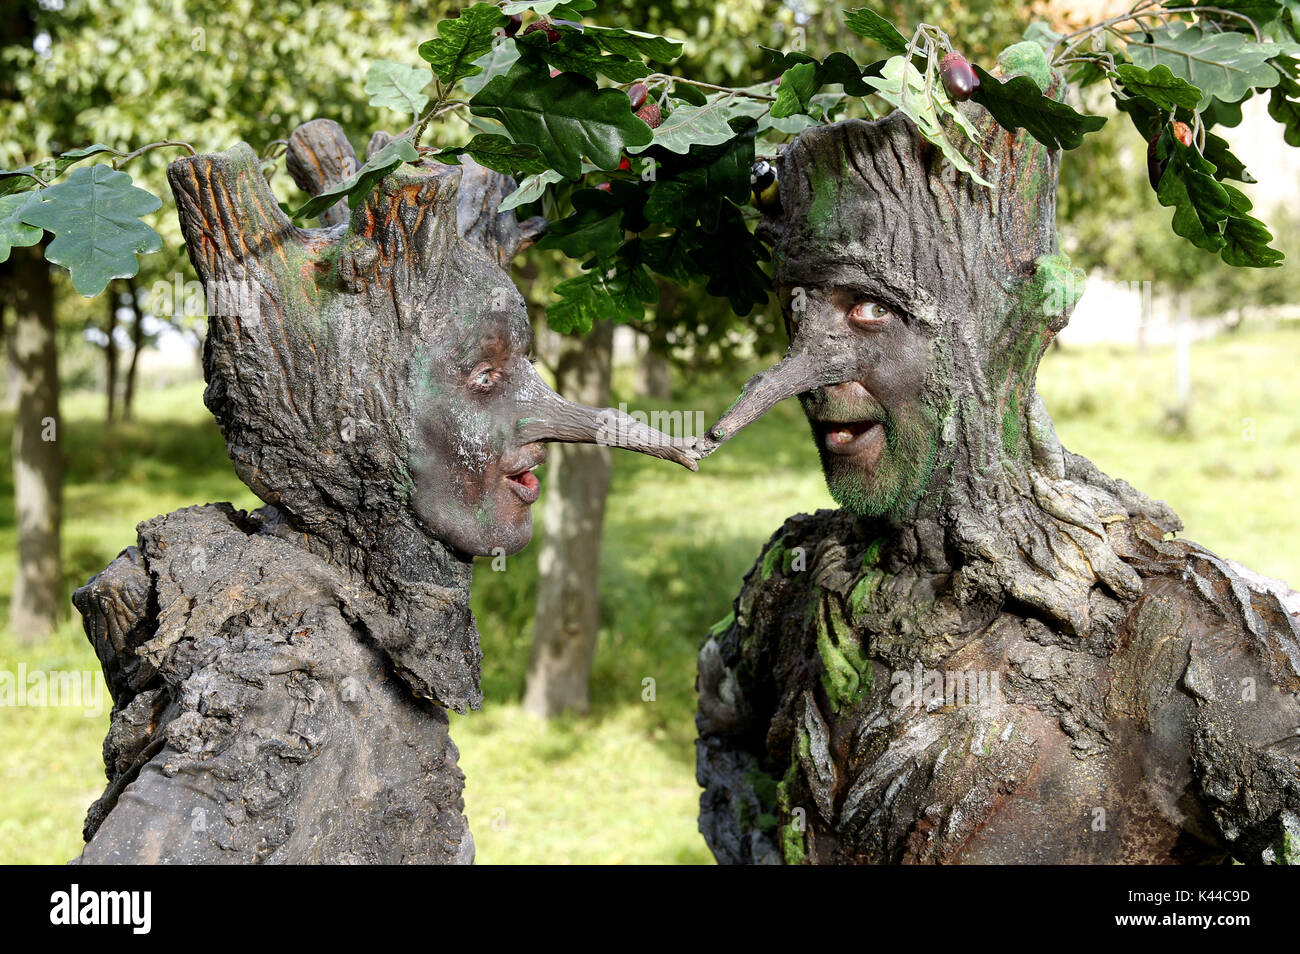 Wittenburg, Deutschland. 30th Aug, 2017. GEEK ART - Bodypainting meets SciFi, Fantasy and more: Fairytale photoshooting with model Maria and Enrico as tree-beings in the monastery garden of the monastery church Wittenburg on August 30, 2017 - A project of the photographer Tschiponnique Skupin and the bodypainter and transformaker Enrico Lein | Verwendung weltweit Credit: dpa/Alamy Live News Stock Photo